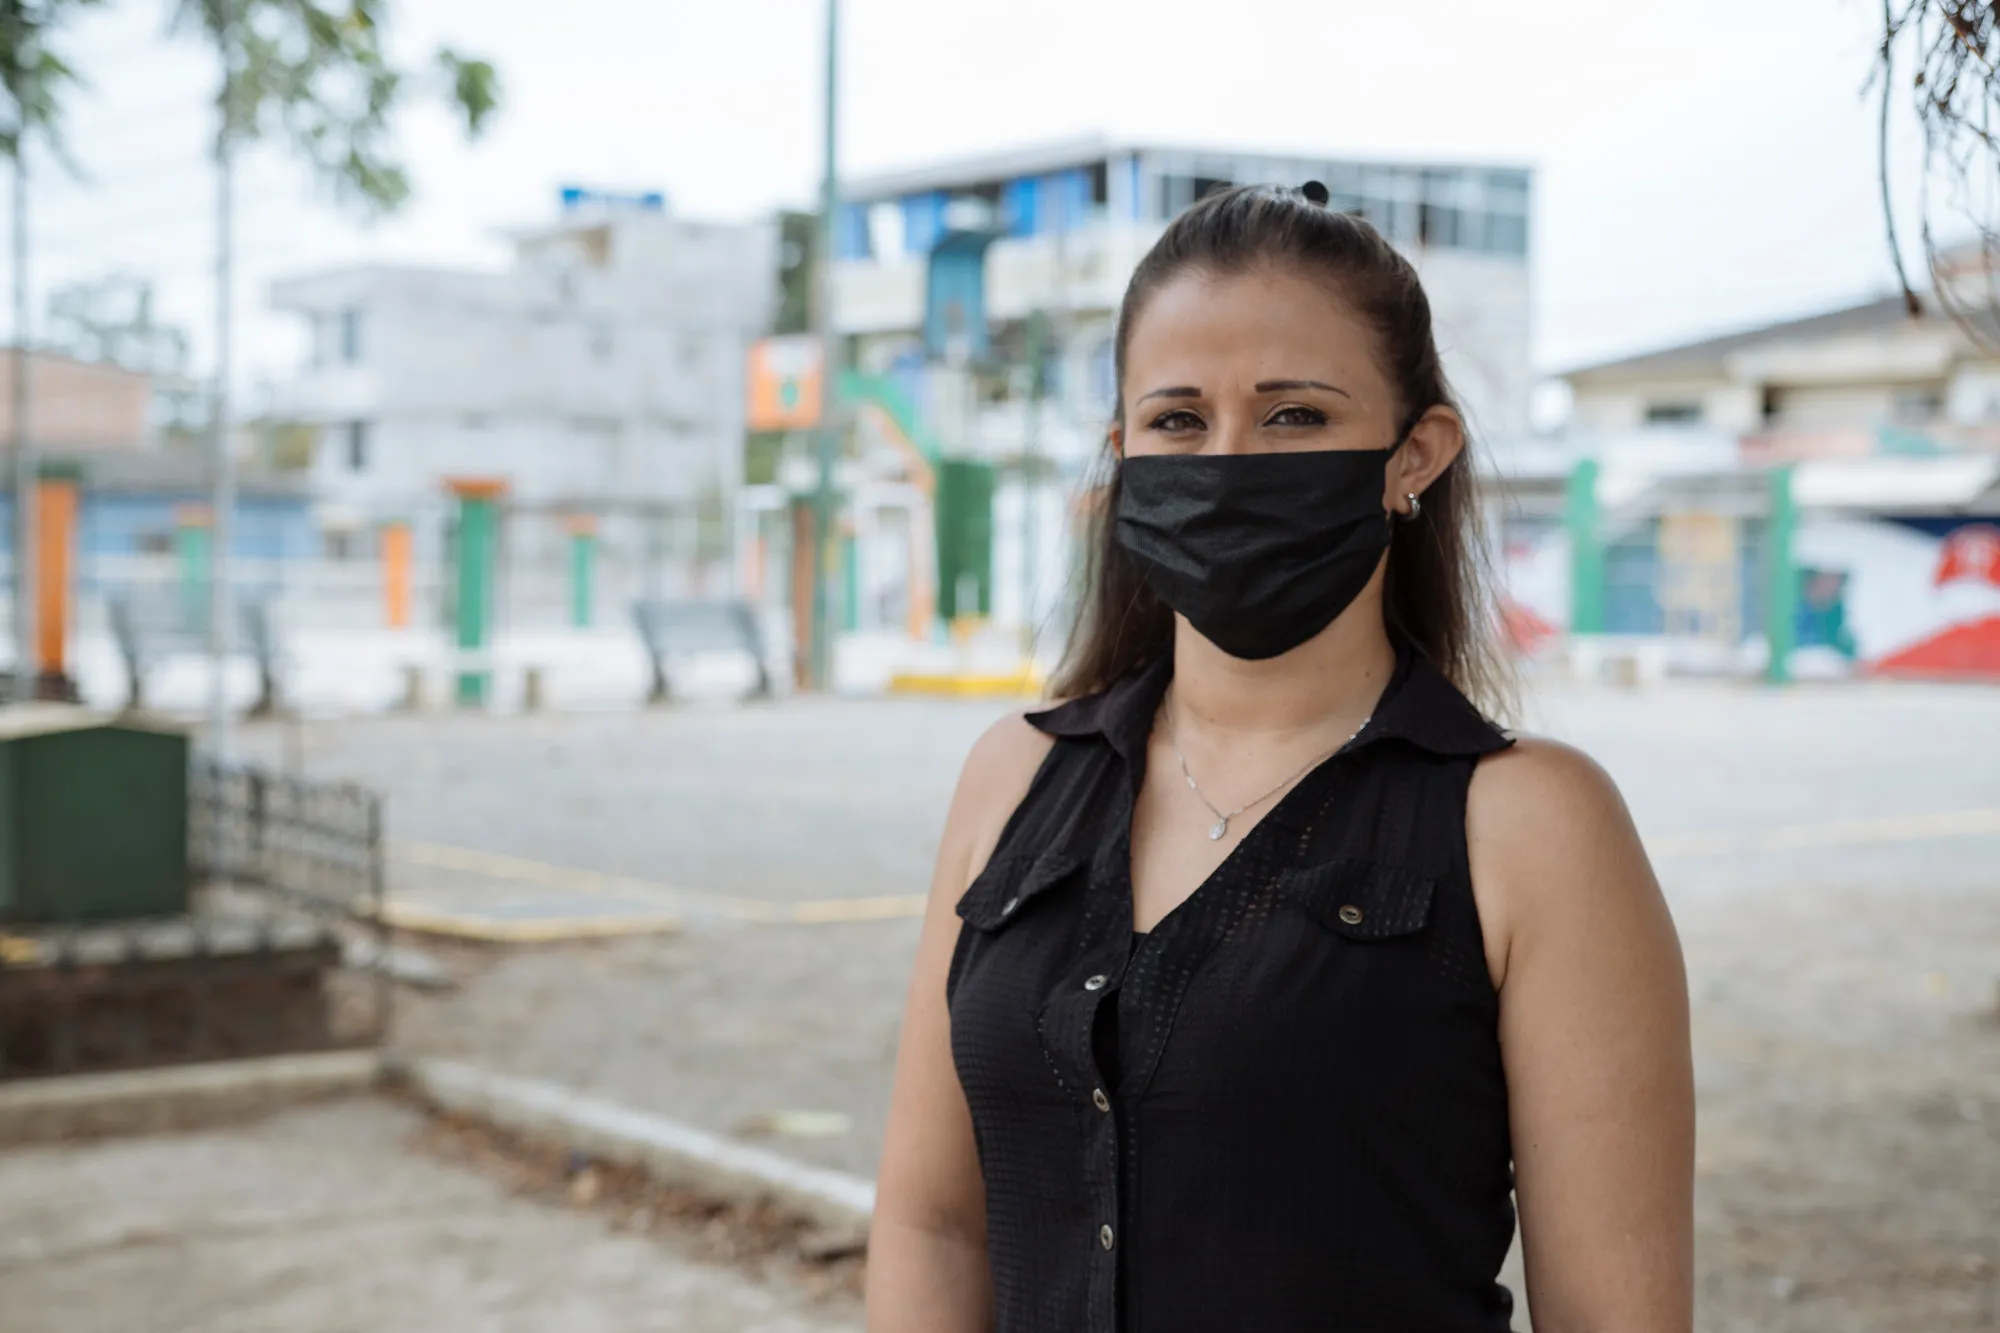 A woman in a face mask stands on a city street.